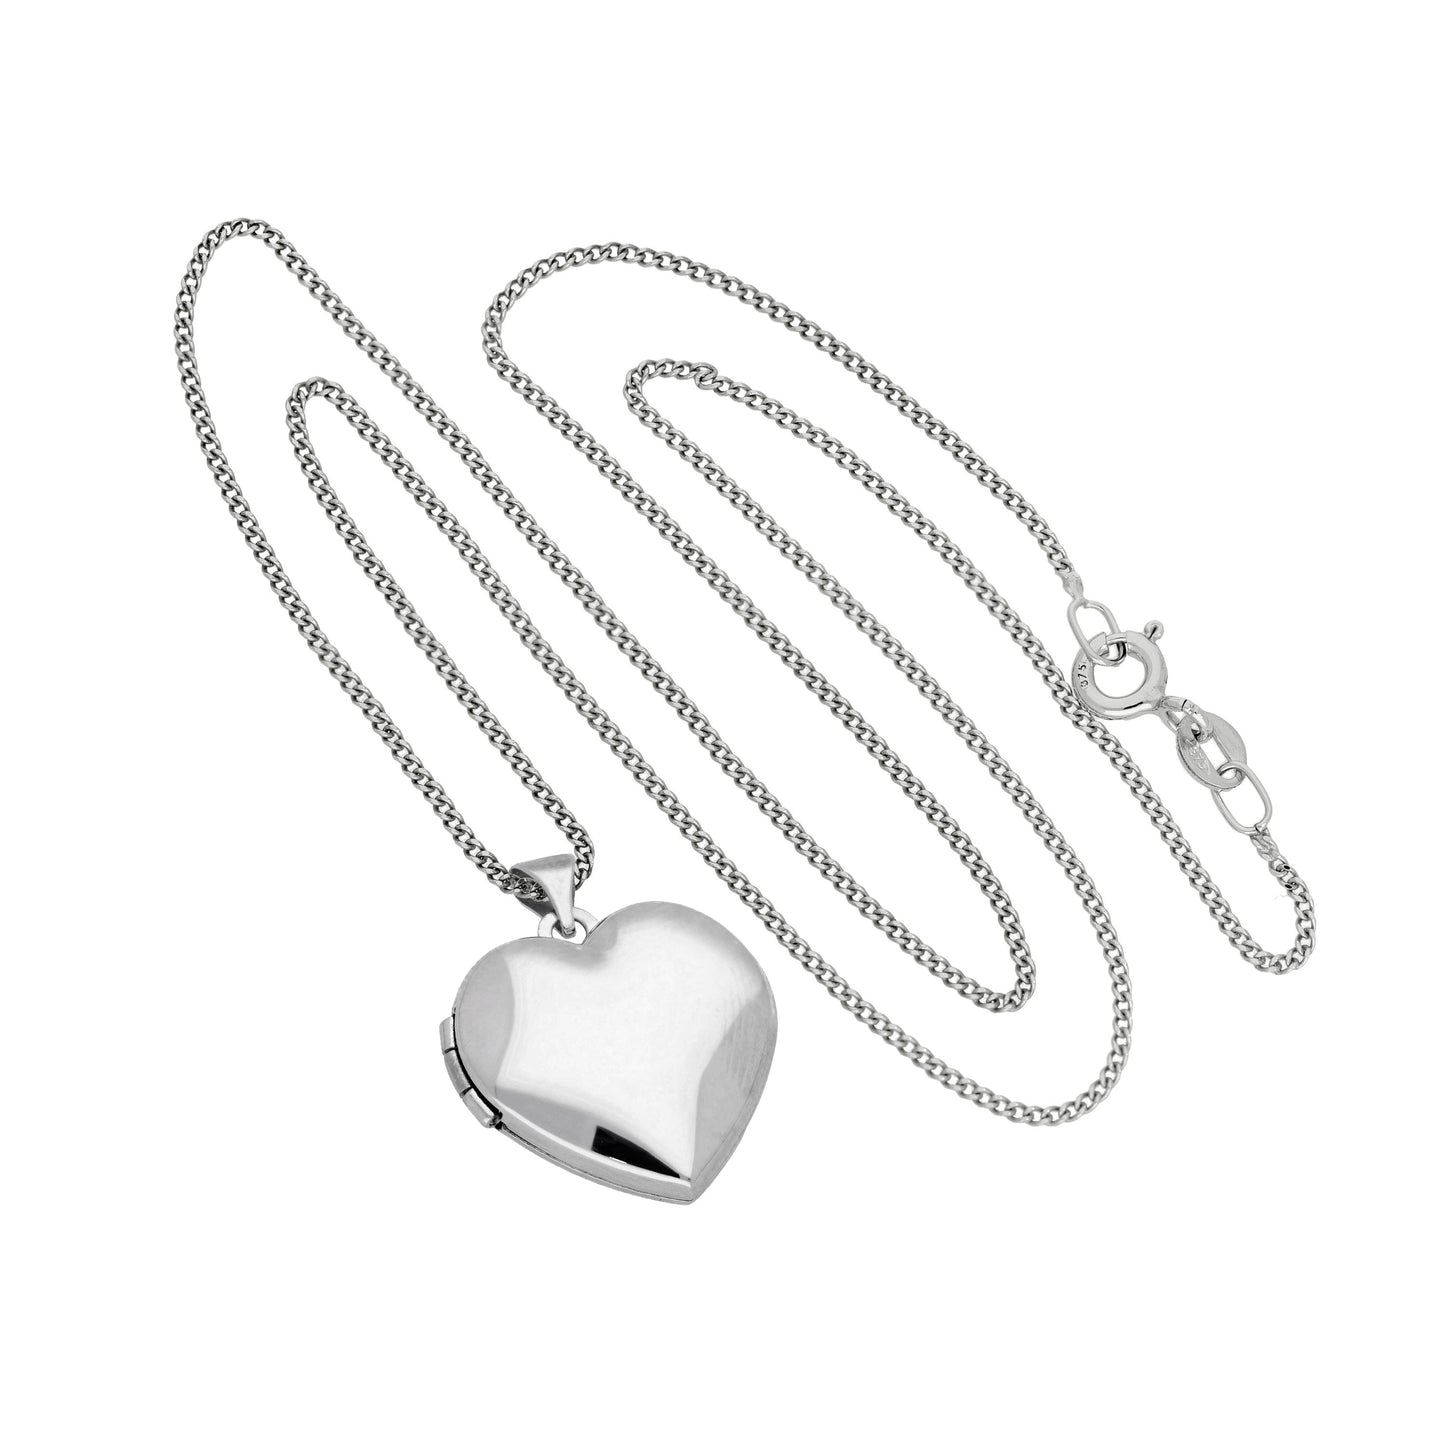 9ct White Gold Engravable Heart Locket on Chain 16 - 18 Inches